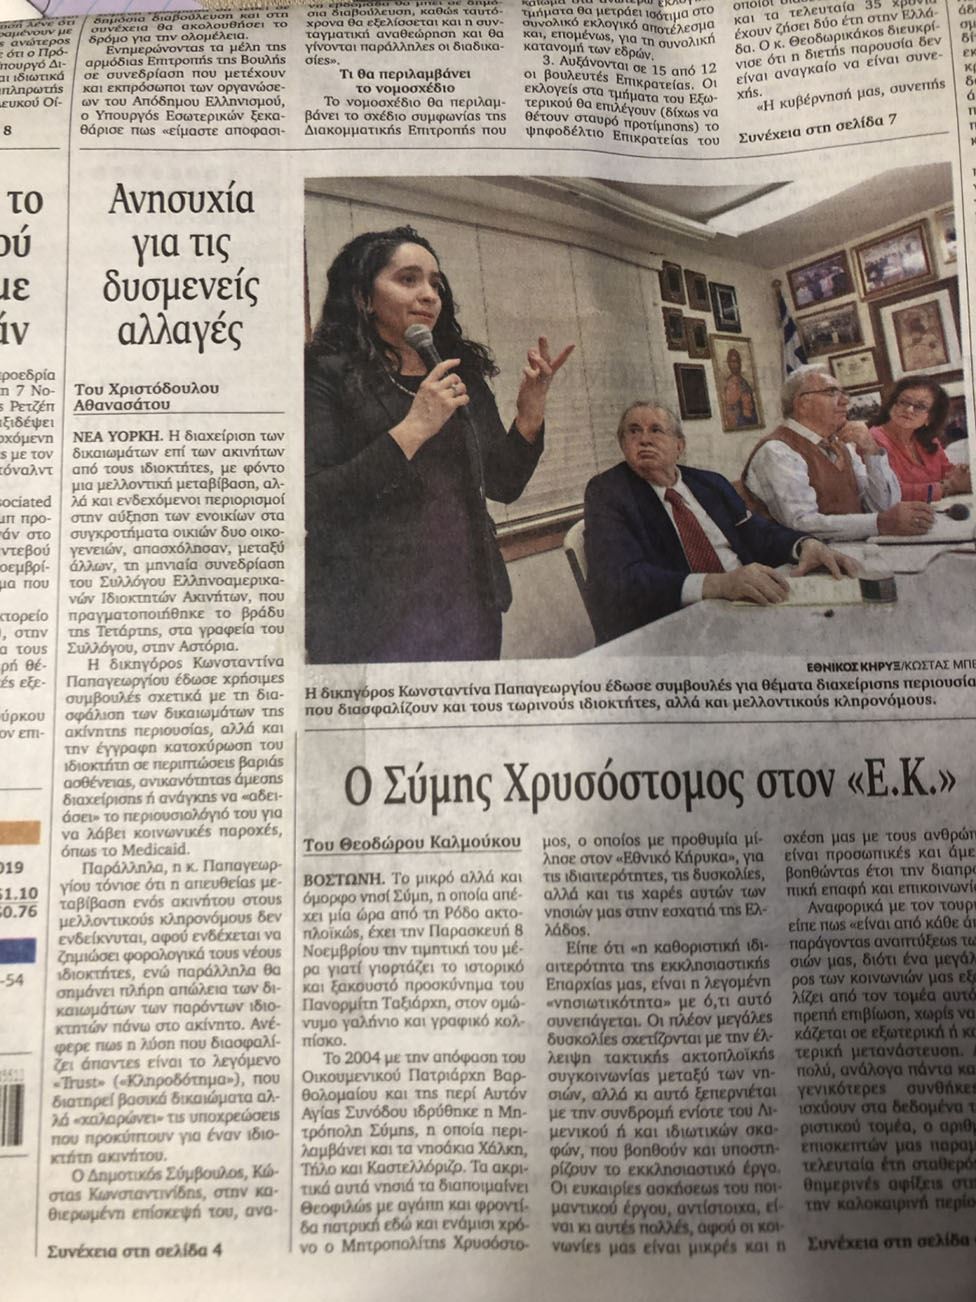 On November 6, 2019, the National Herald (Greek Herald) featured the Greek-American Homeowners Association fundraiser. VMM was proud to cosponsor the event. Partner Constantina Papageorgiou (standing in picture) led a seminar about elder law-related matters.